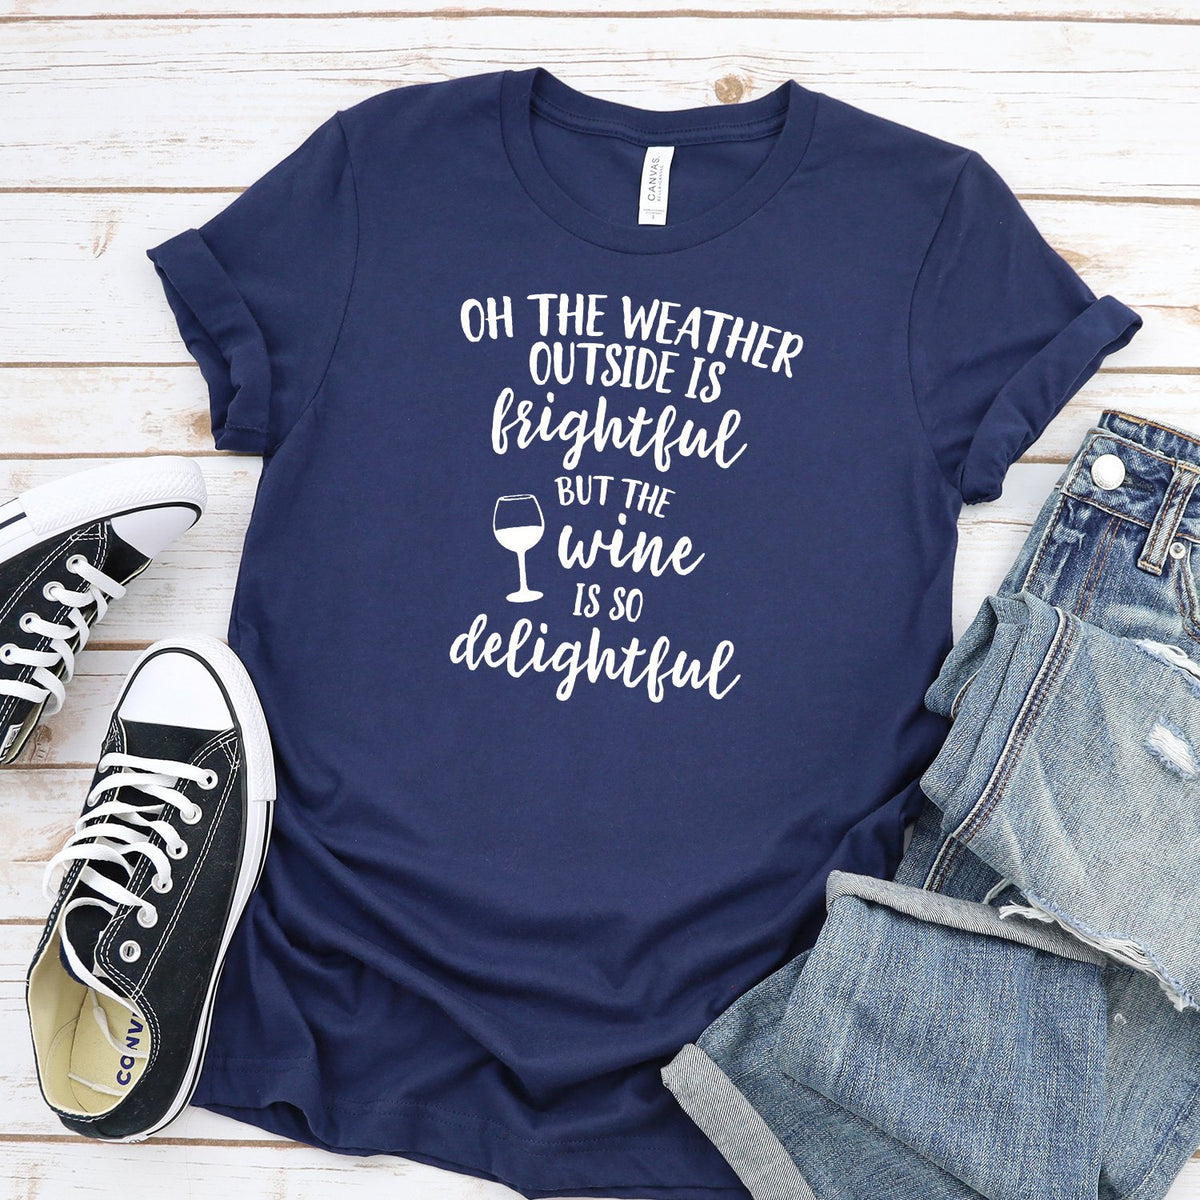 Oh The Weather Outside is Frightful But The Wine is So Delightful - Short Sleeve Tee Shirt